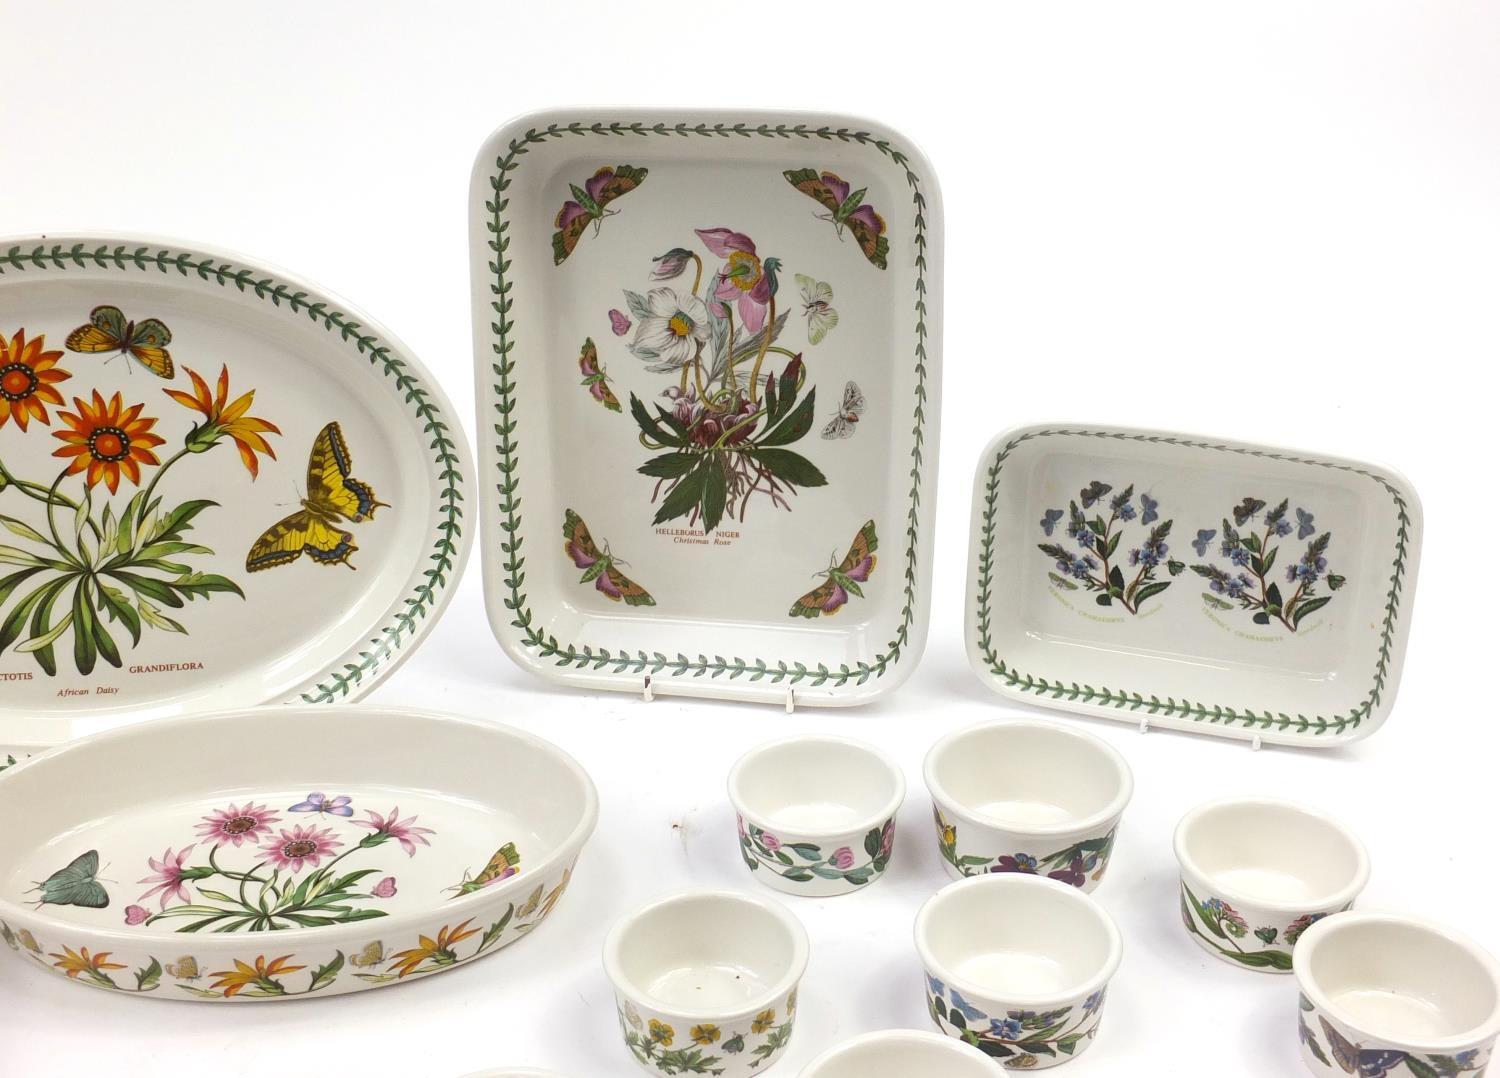 Portmeirion Botanic Garden dinnerware including meat plates and ramekins, the largest 35cm in length - Image 8 of 19